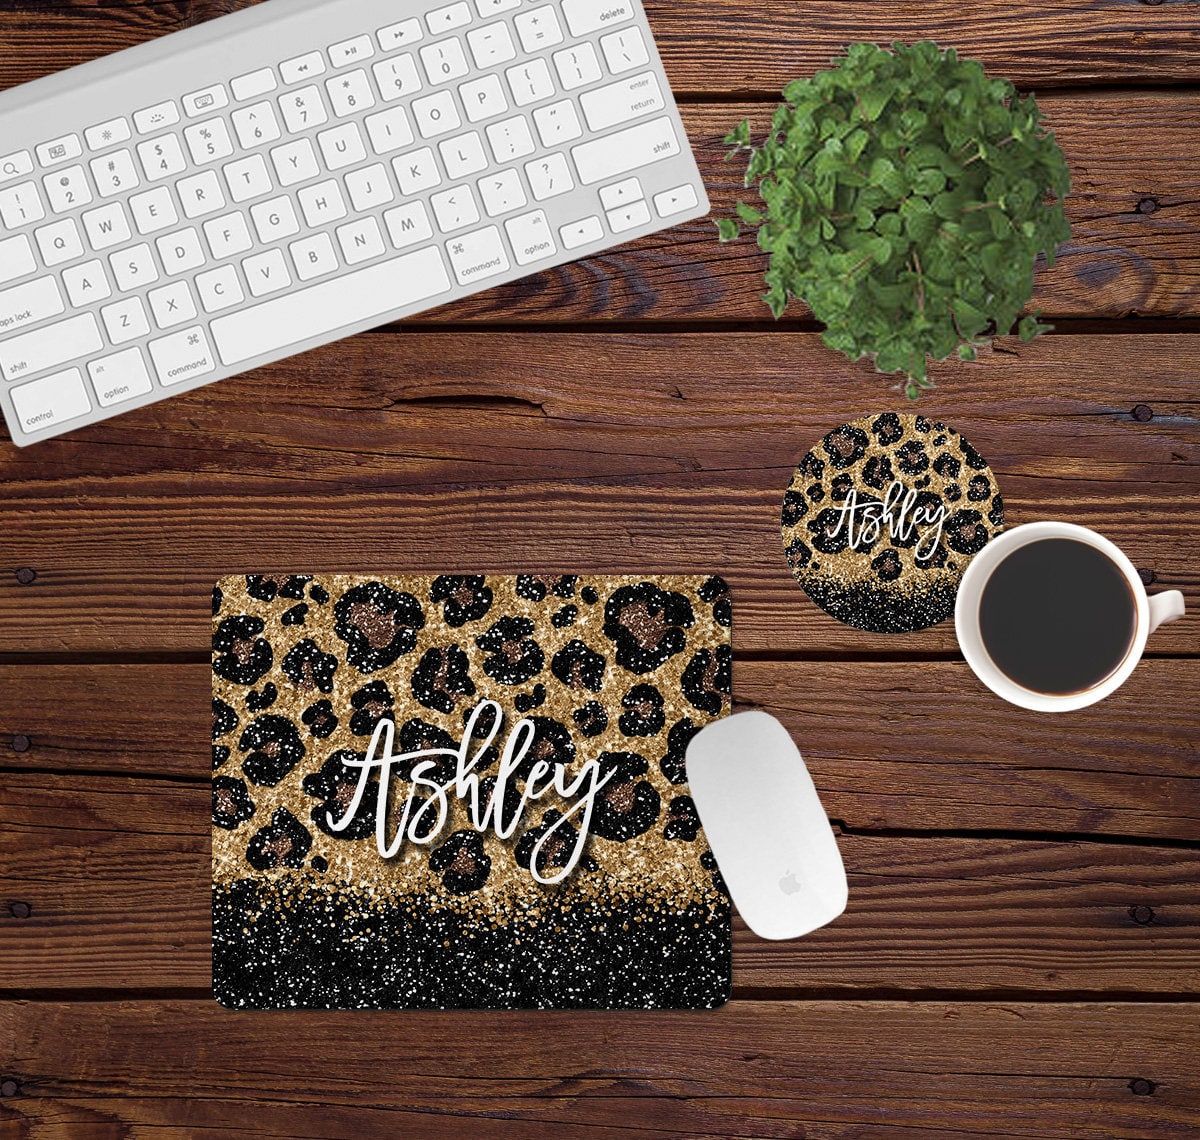 Cheetah Mouse pad Mousepad Beige Office Decor for Women Men Desk Accessories  Leopard Animal Print Mousepad Gift for Coworker 9.5×7.9×0.12 inches 